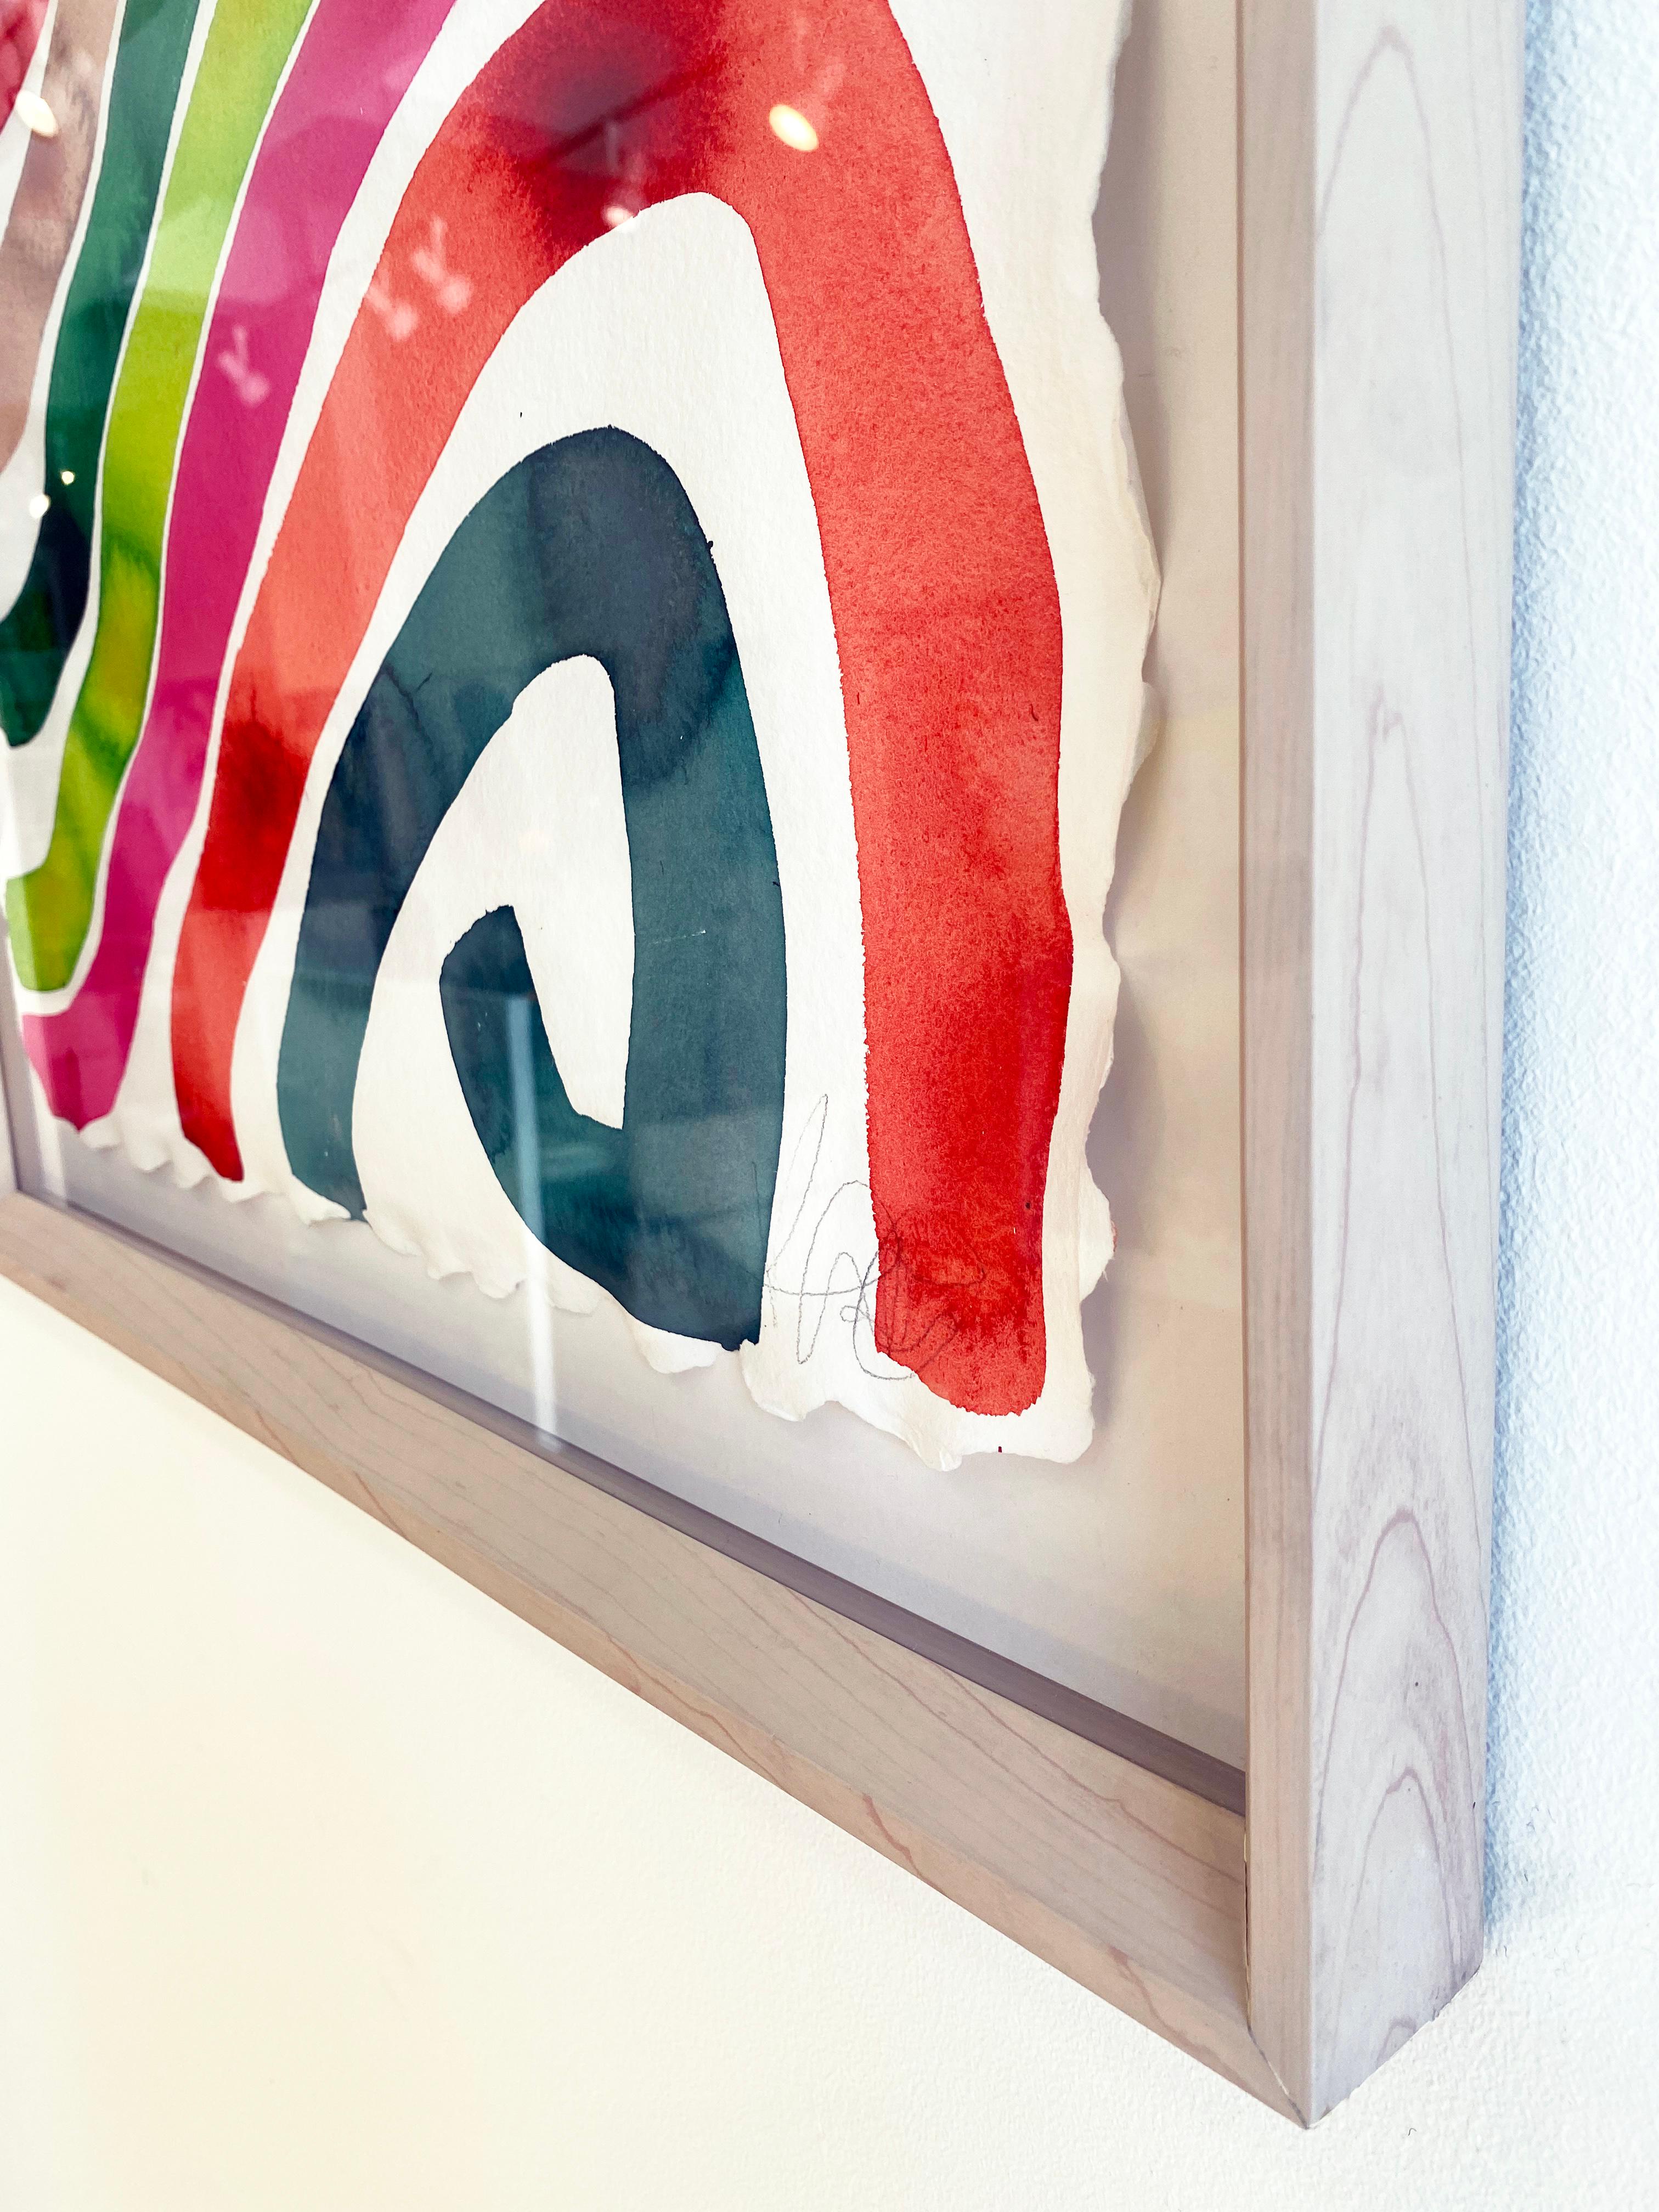 'Waves' 2021 by Kate Roebuck. Ink and watercolor on handmade watercolor paper with decked edge, diptych. 27 x 40 inches, 27 x 20 in each. This colorful abstract work features a rainbow of colorful lines in blue, green, pink, red, and black across